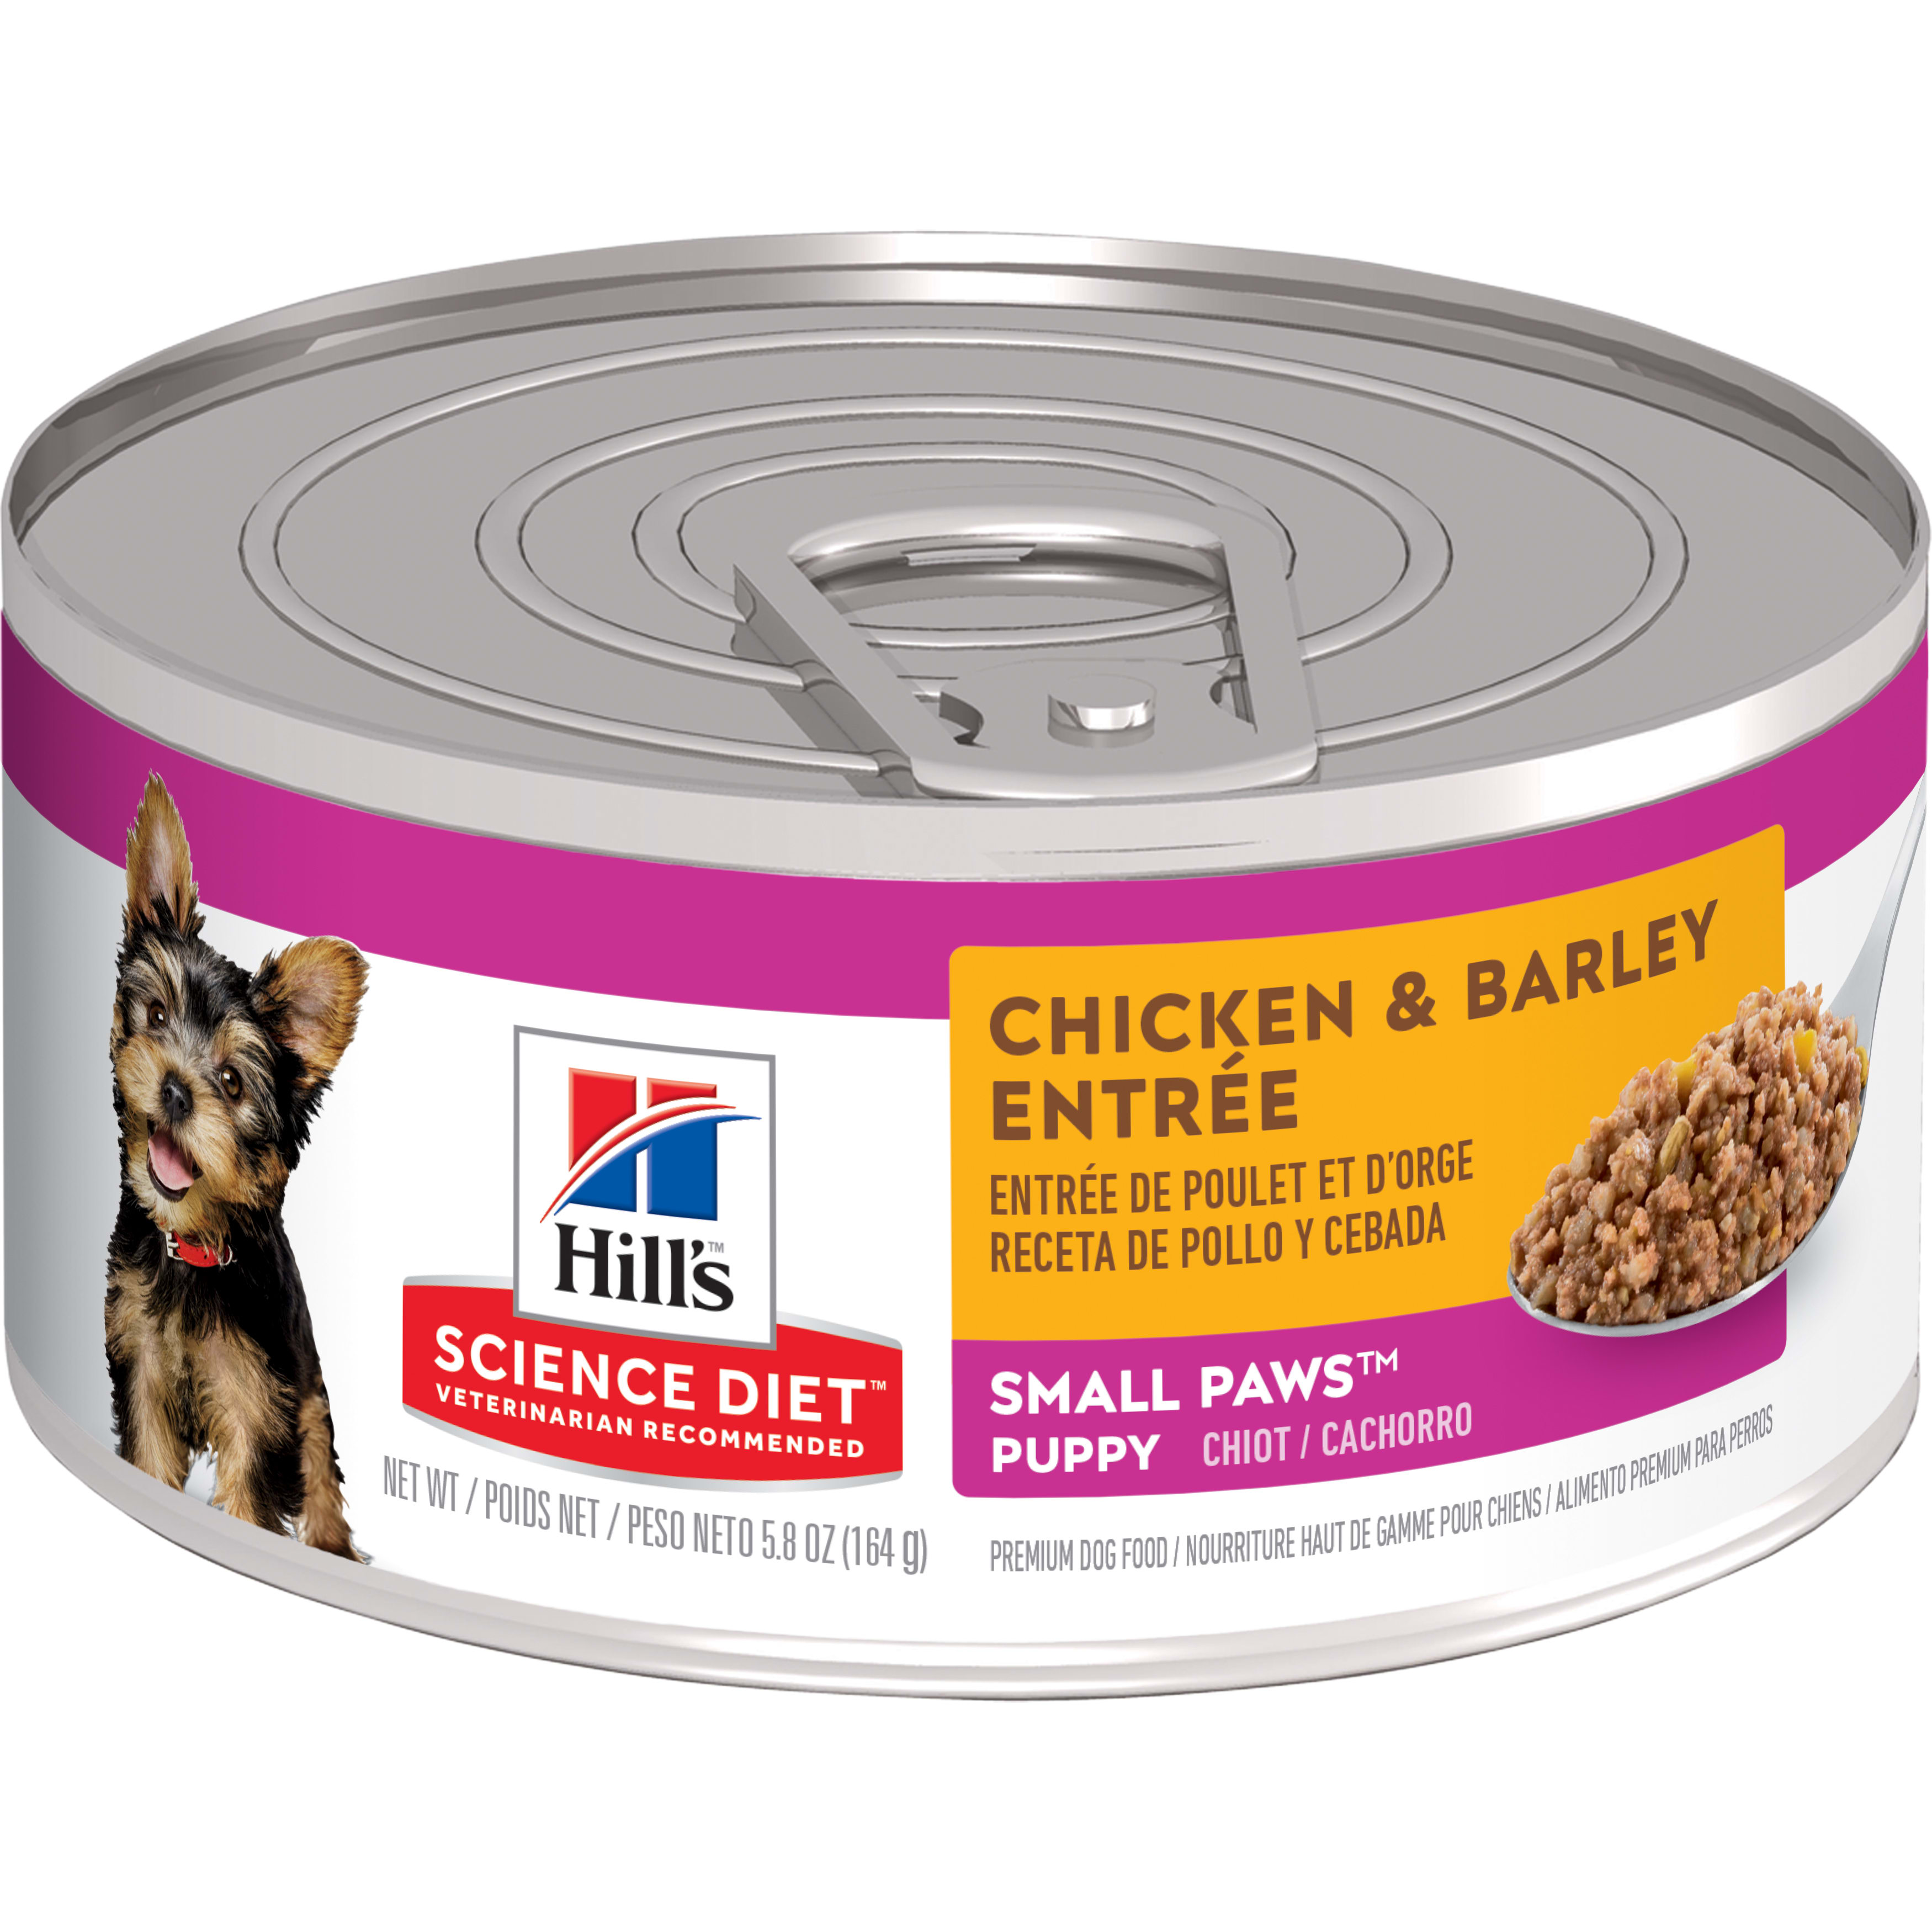 when can you give puppies wet food